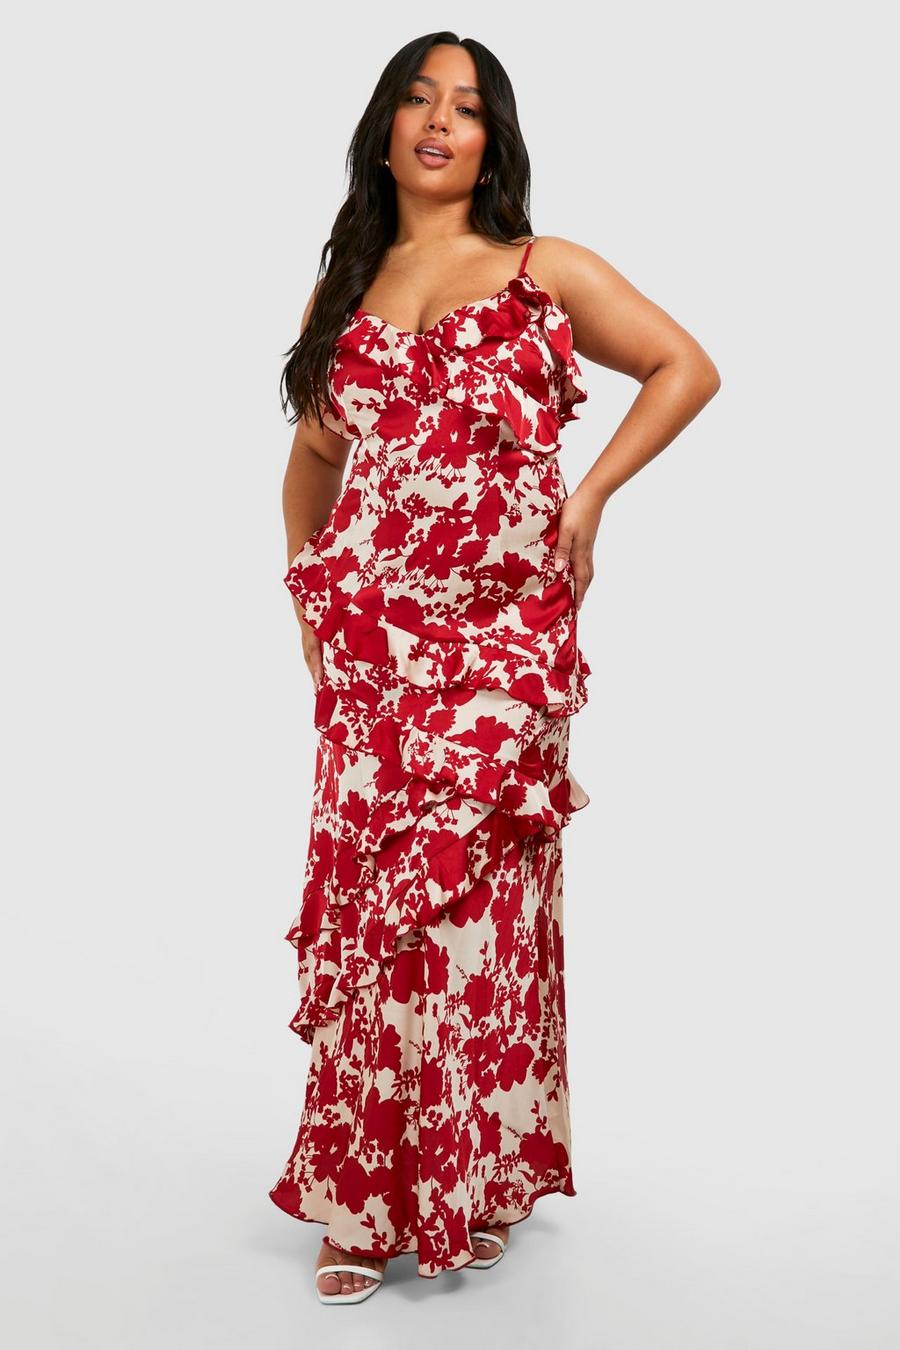 Grande taille - Robe nuisette fleurie à volants, Red